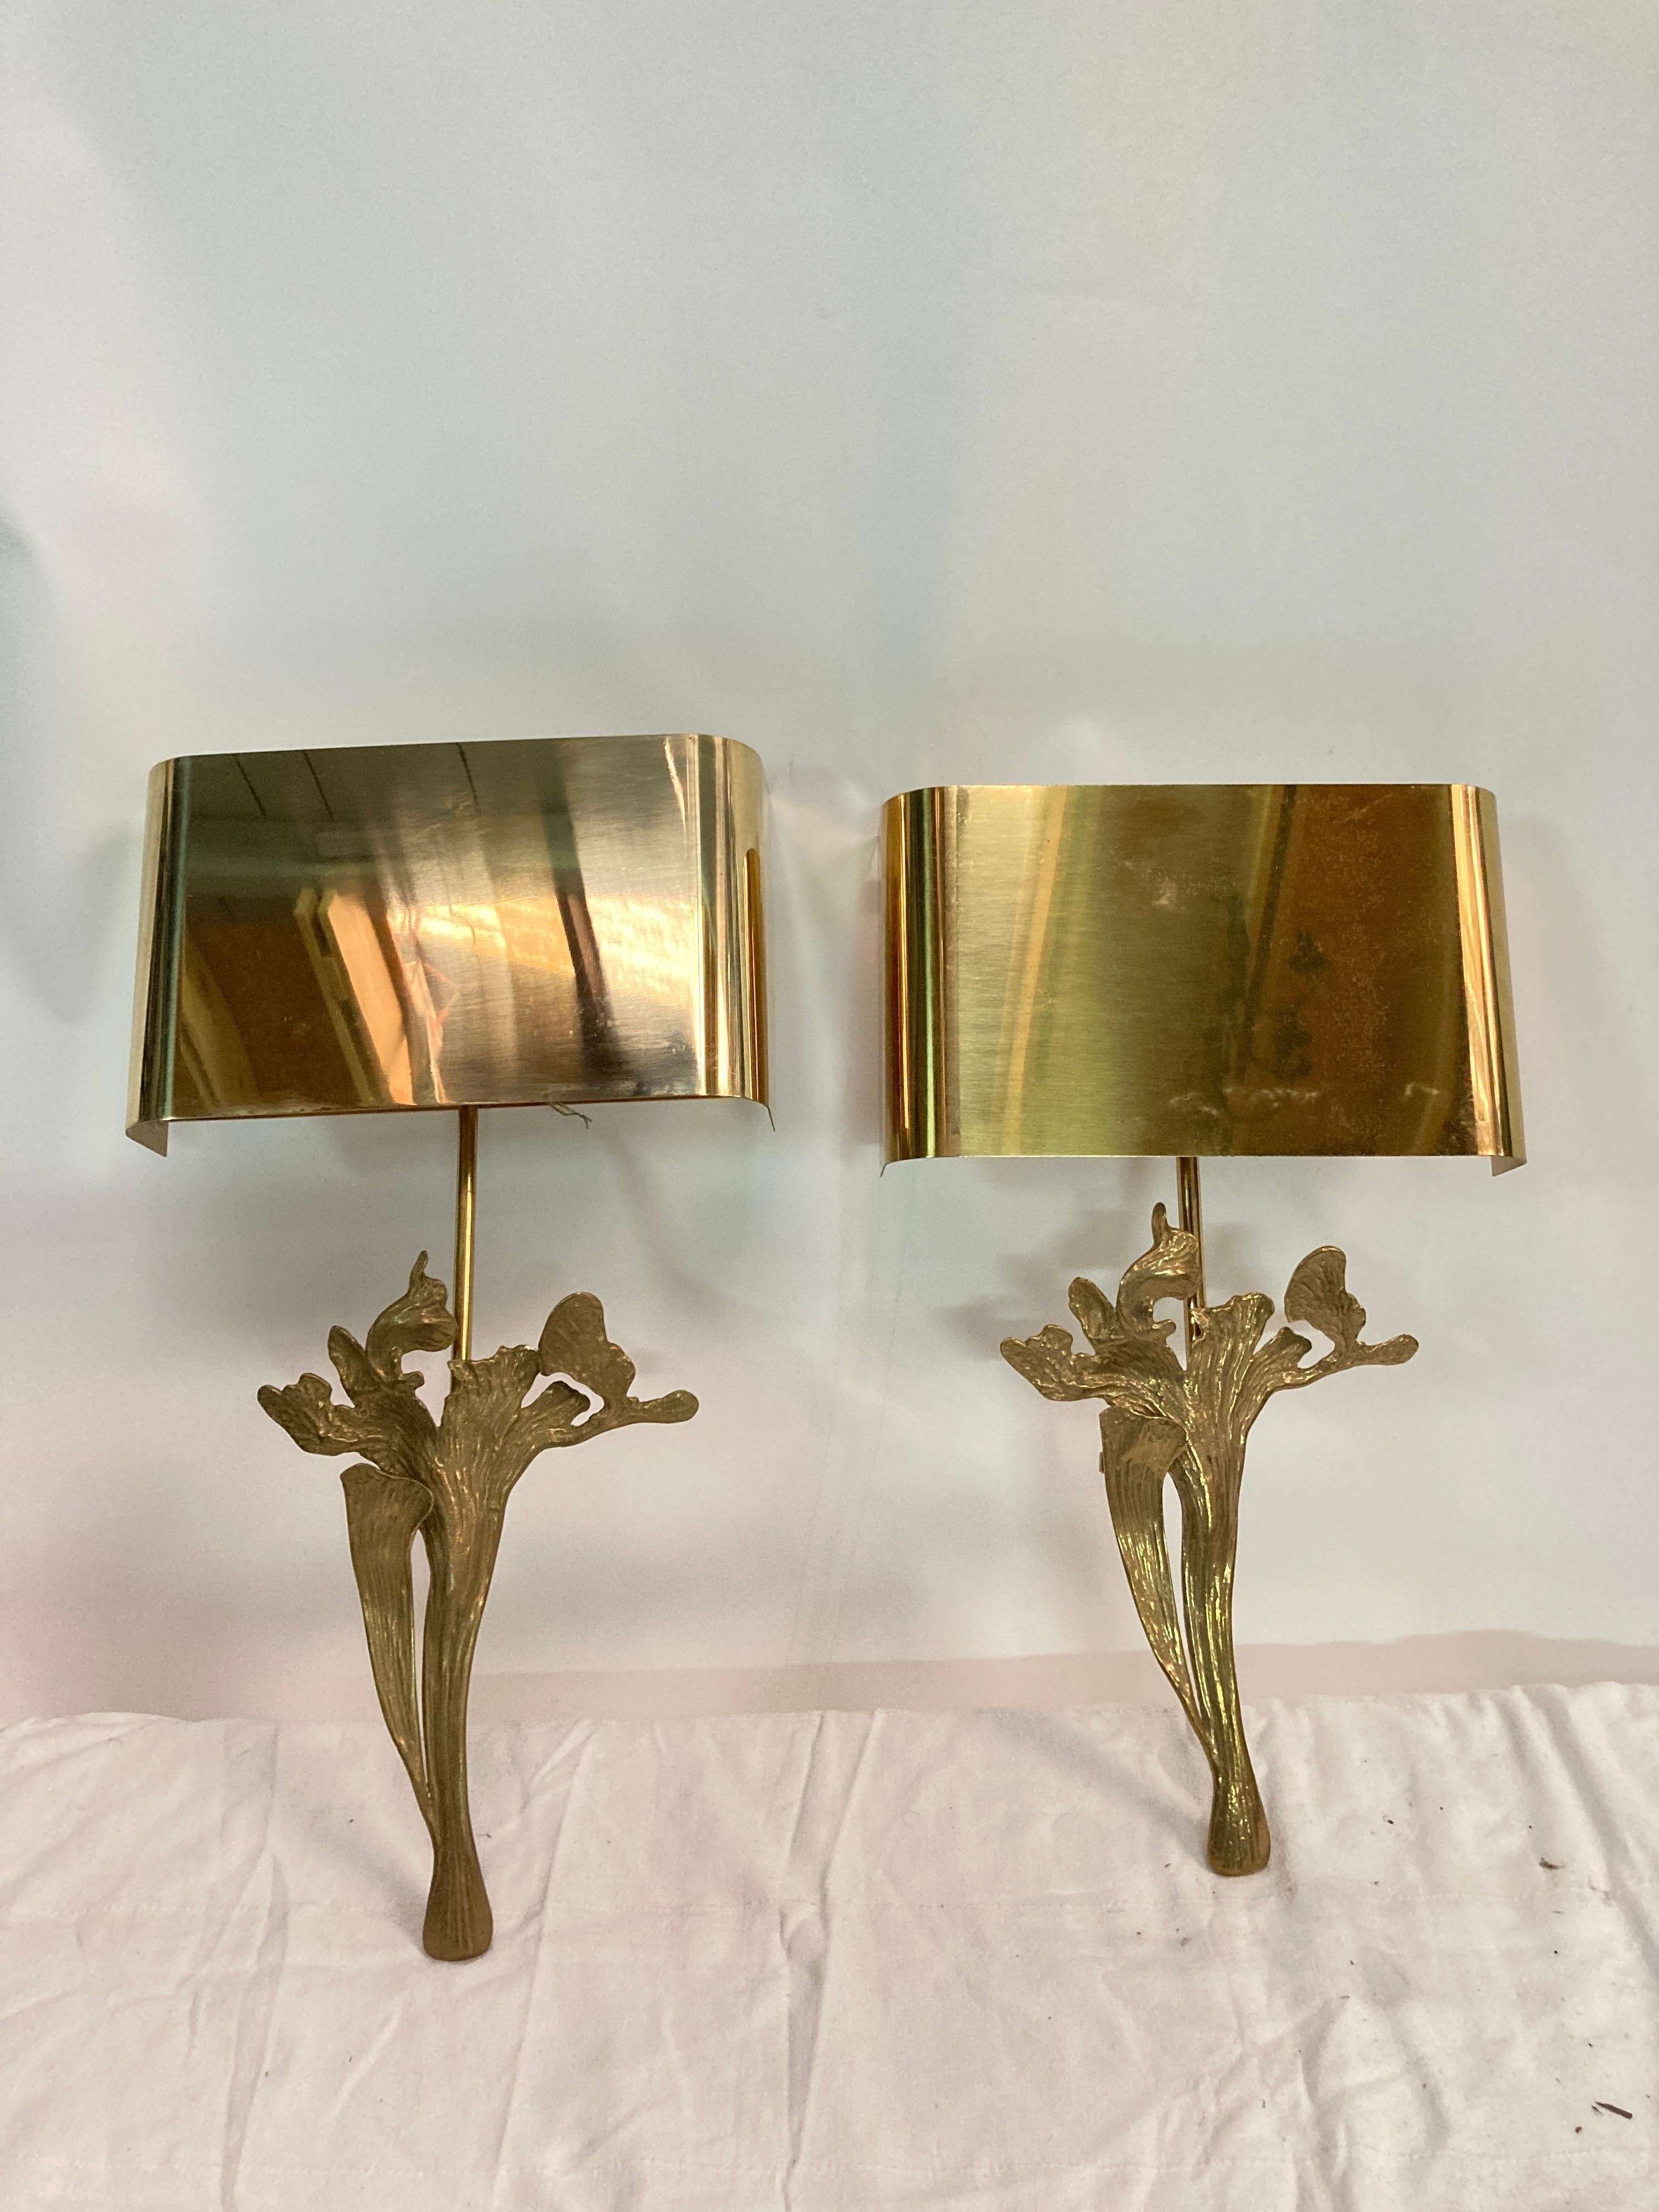 NIce pair of bronze sconces with polished brass shade
Signed by Maison Charles
Made in France
Two pairs available 
Re-wired